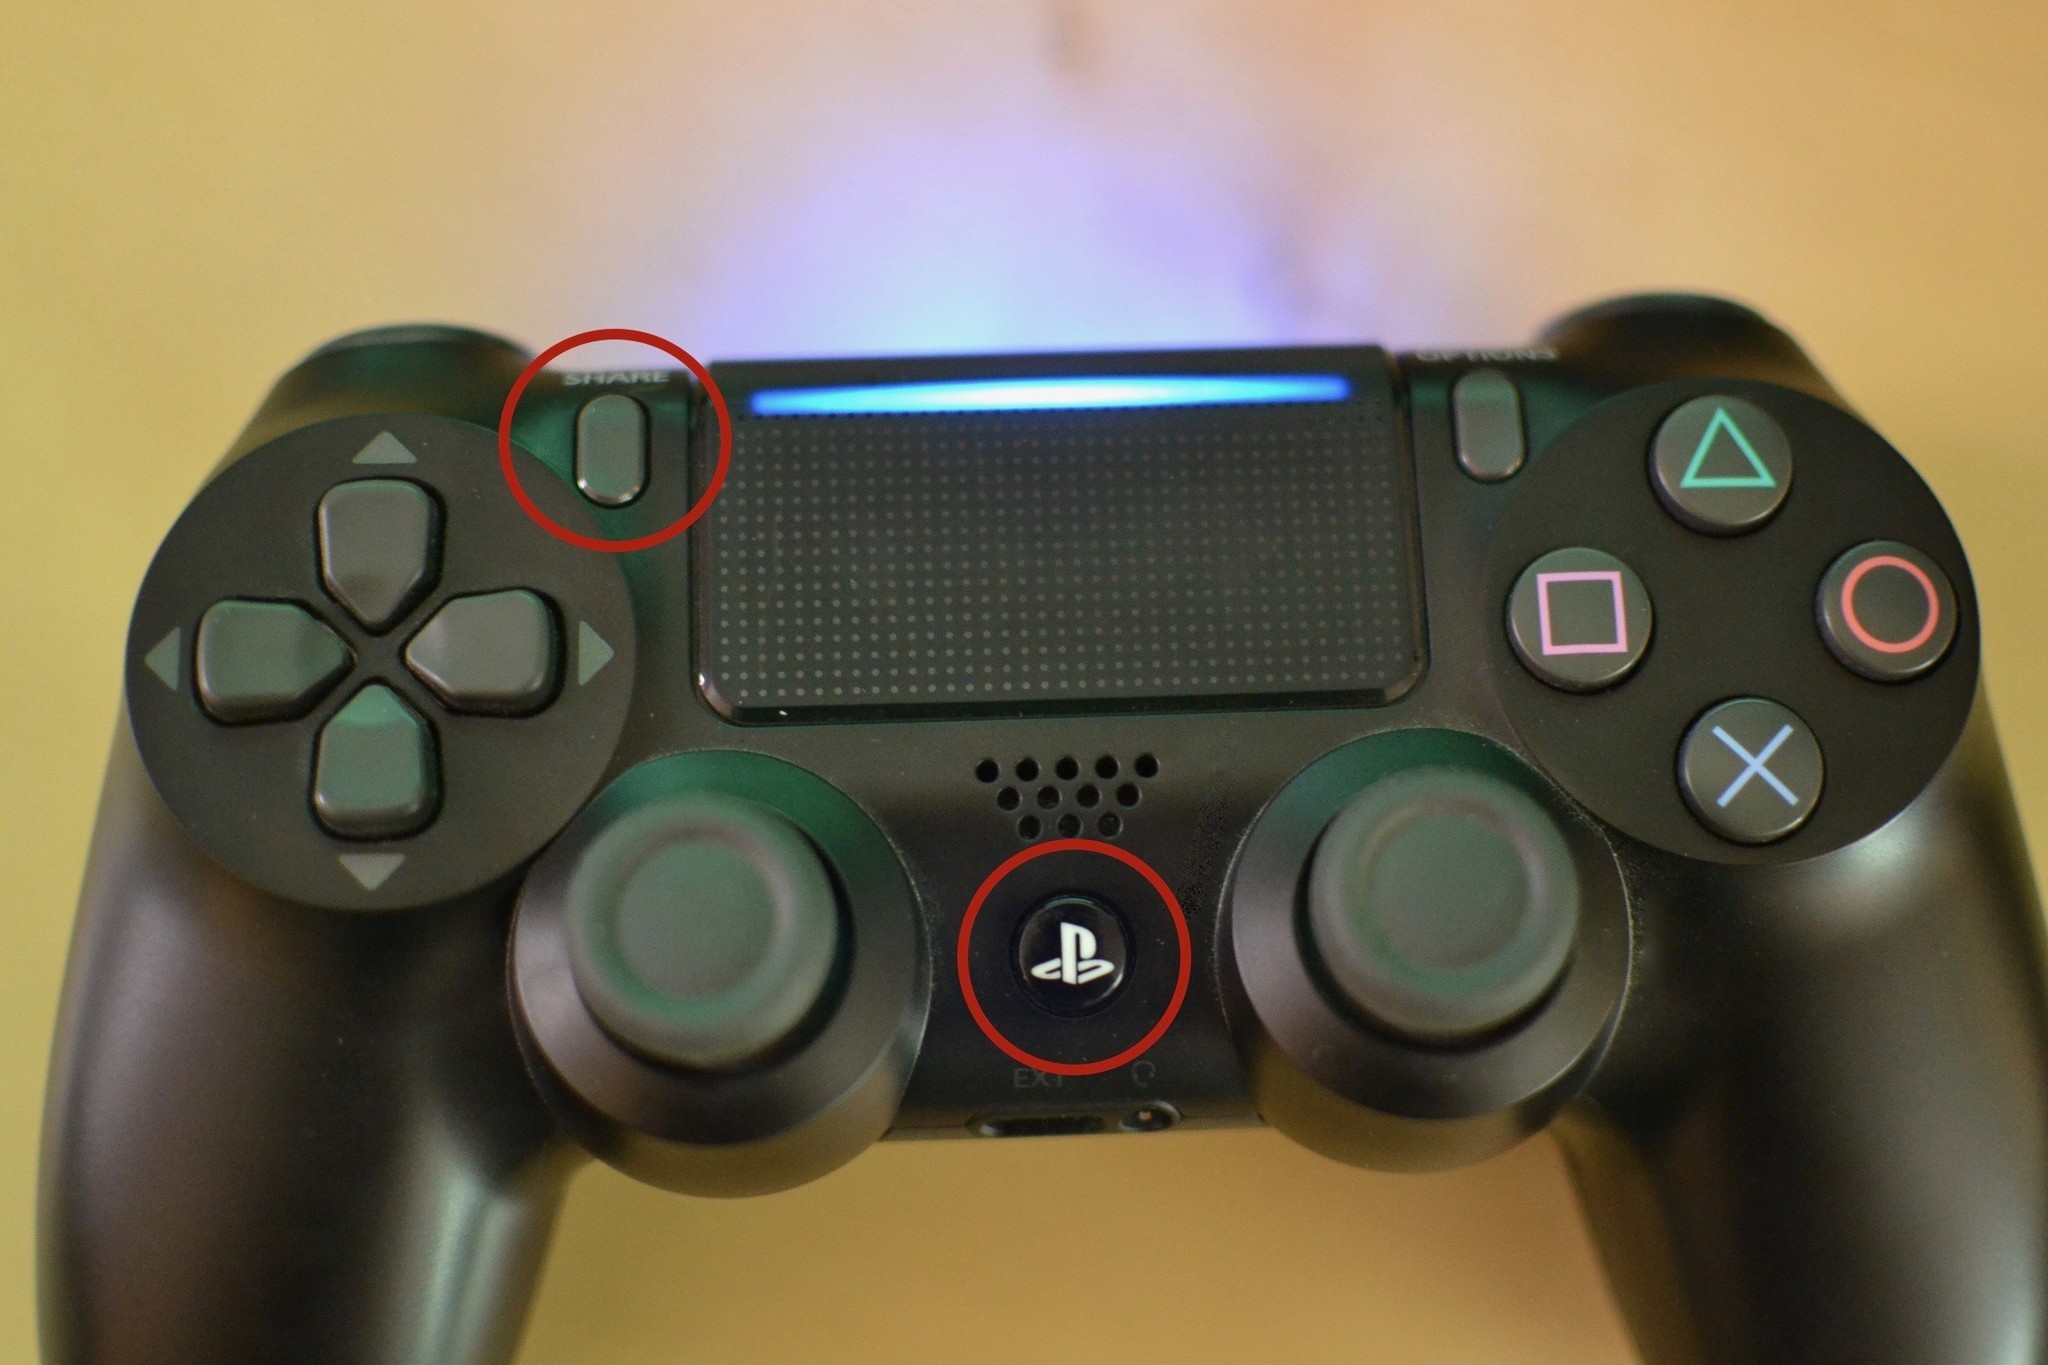 How to use a PS4 Controller with Nintendo Switch: On the PS4 DualShock Controller hold down the PS button and share button simultaneously until the light blinks white